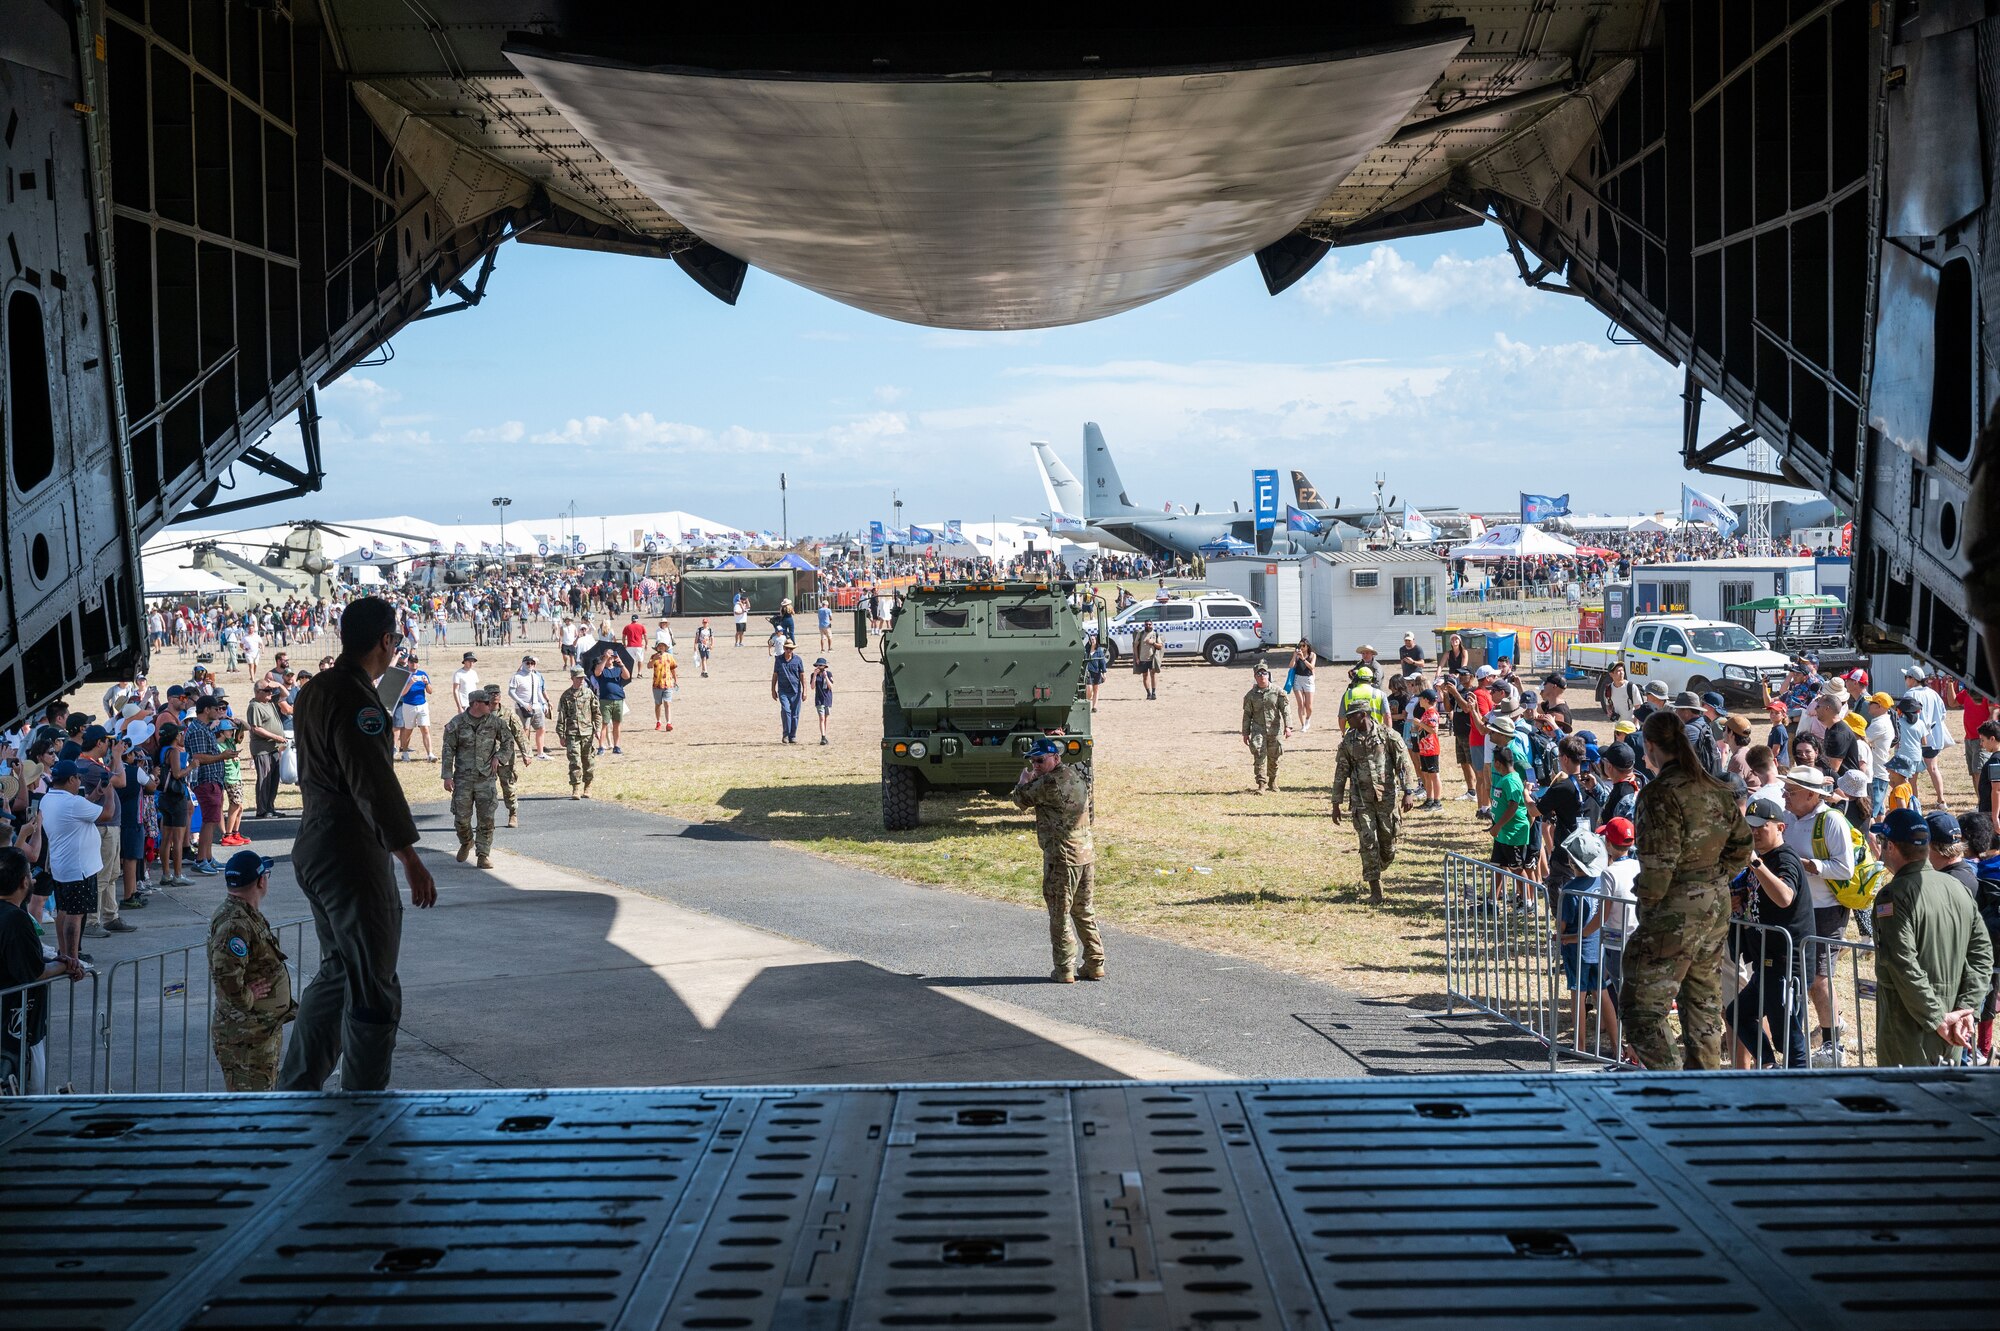 An M142 HIMARS gets loaded onto a C-5M Super Galaxy while spectators watch at the 2023 Australian International Airshow and Aerospace & Defence Exposition—AVALON 23—at Avalon International Airport, March 2, 2023. Our steadfast relationship with Australia, deeply rooted in our common principles and shared values, stems from working together day in and day out across the full spectrum of operations and will continue to prosper as we further integrate our efforts through events such as AVALON 23. (U.S. Air Force photo by Tech. Sgt. Hailey Haux)